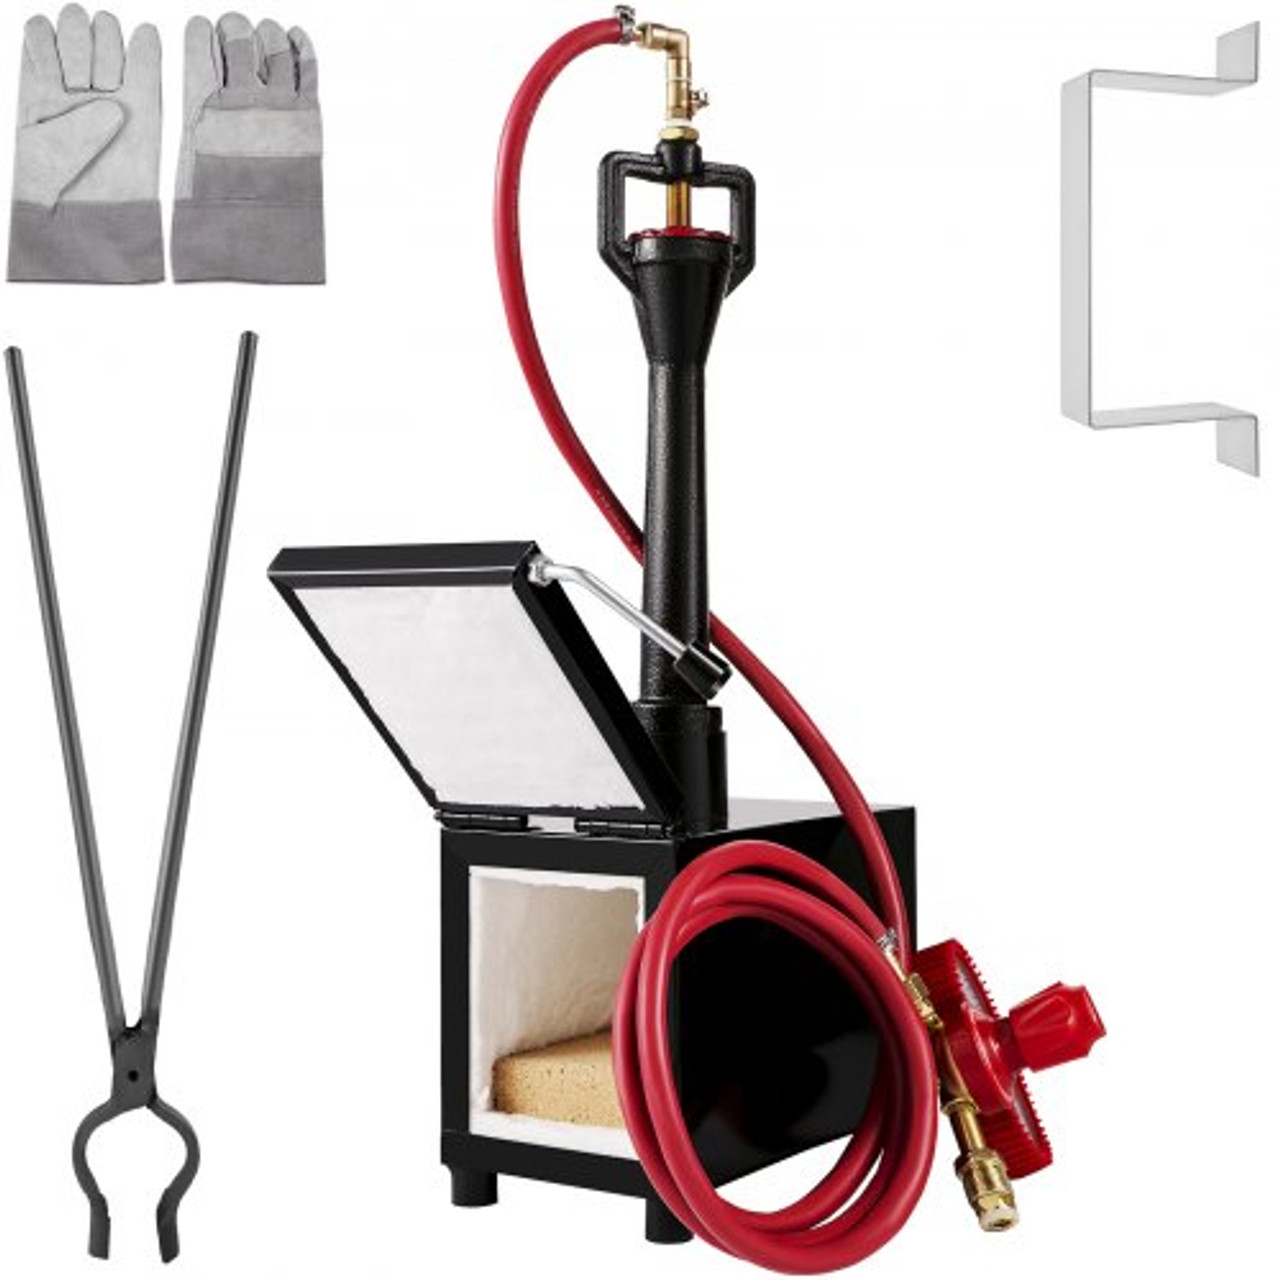 Propane Forge Portable, Double Burner Tool and Knife Making, Large Capacity  Blacksmith Farrier Forges, Mini Furnace